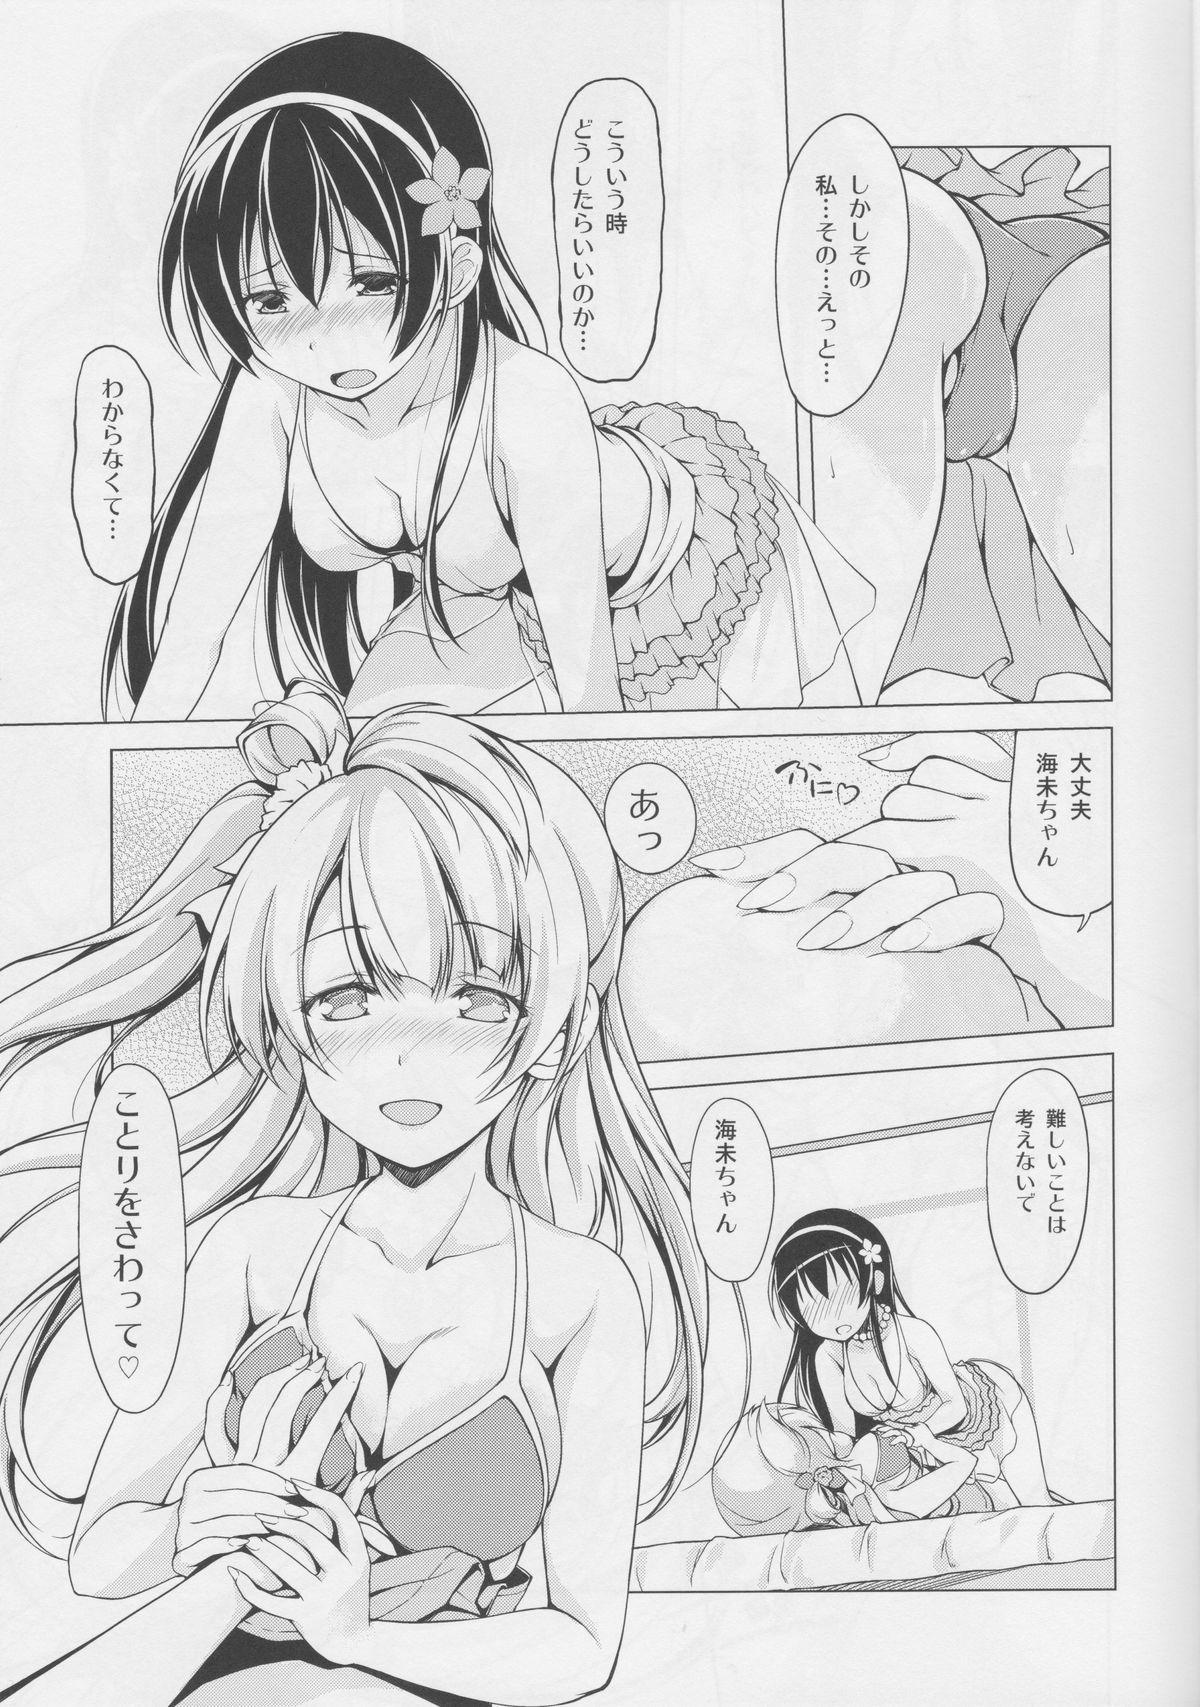 Culos Muffin Affection - Love live Ball Busting - Page 8